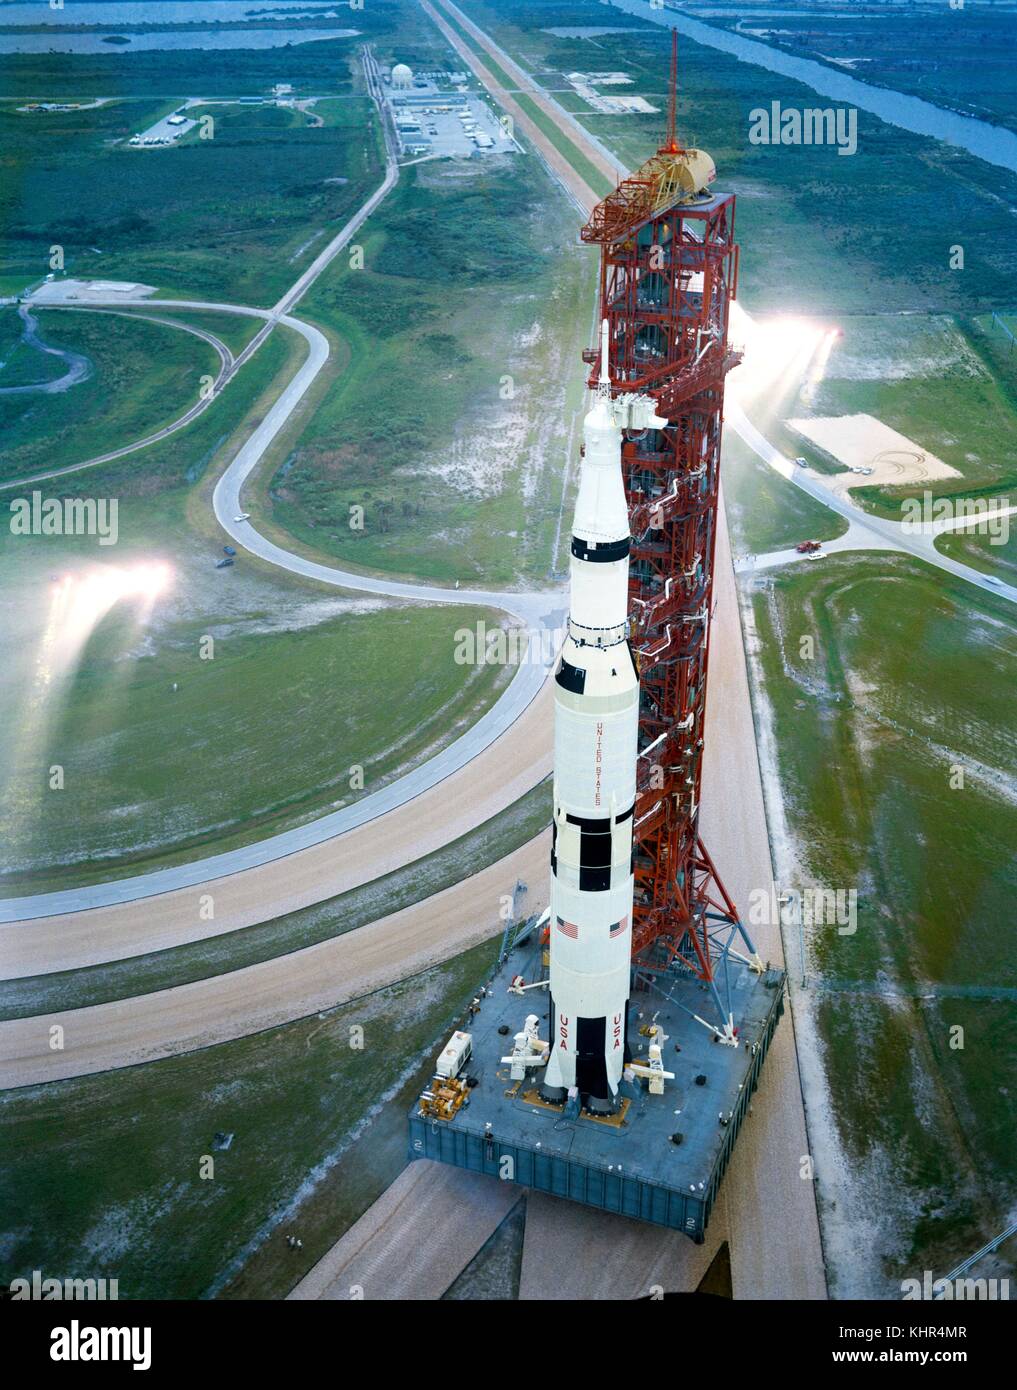 The NASA Apollo 12 spacecraft and Saturn V launch vehicle leave the Kennedy Space Center Vehicle Assembly Building in preparation for their launch and lunar landing mission September 8, 1969 in Merritt Island, Florida.  (photo by NASA Photo via Planetpix) Stock Photo